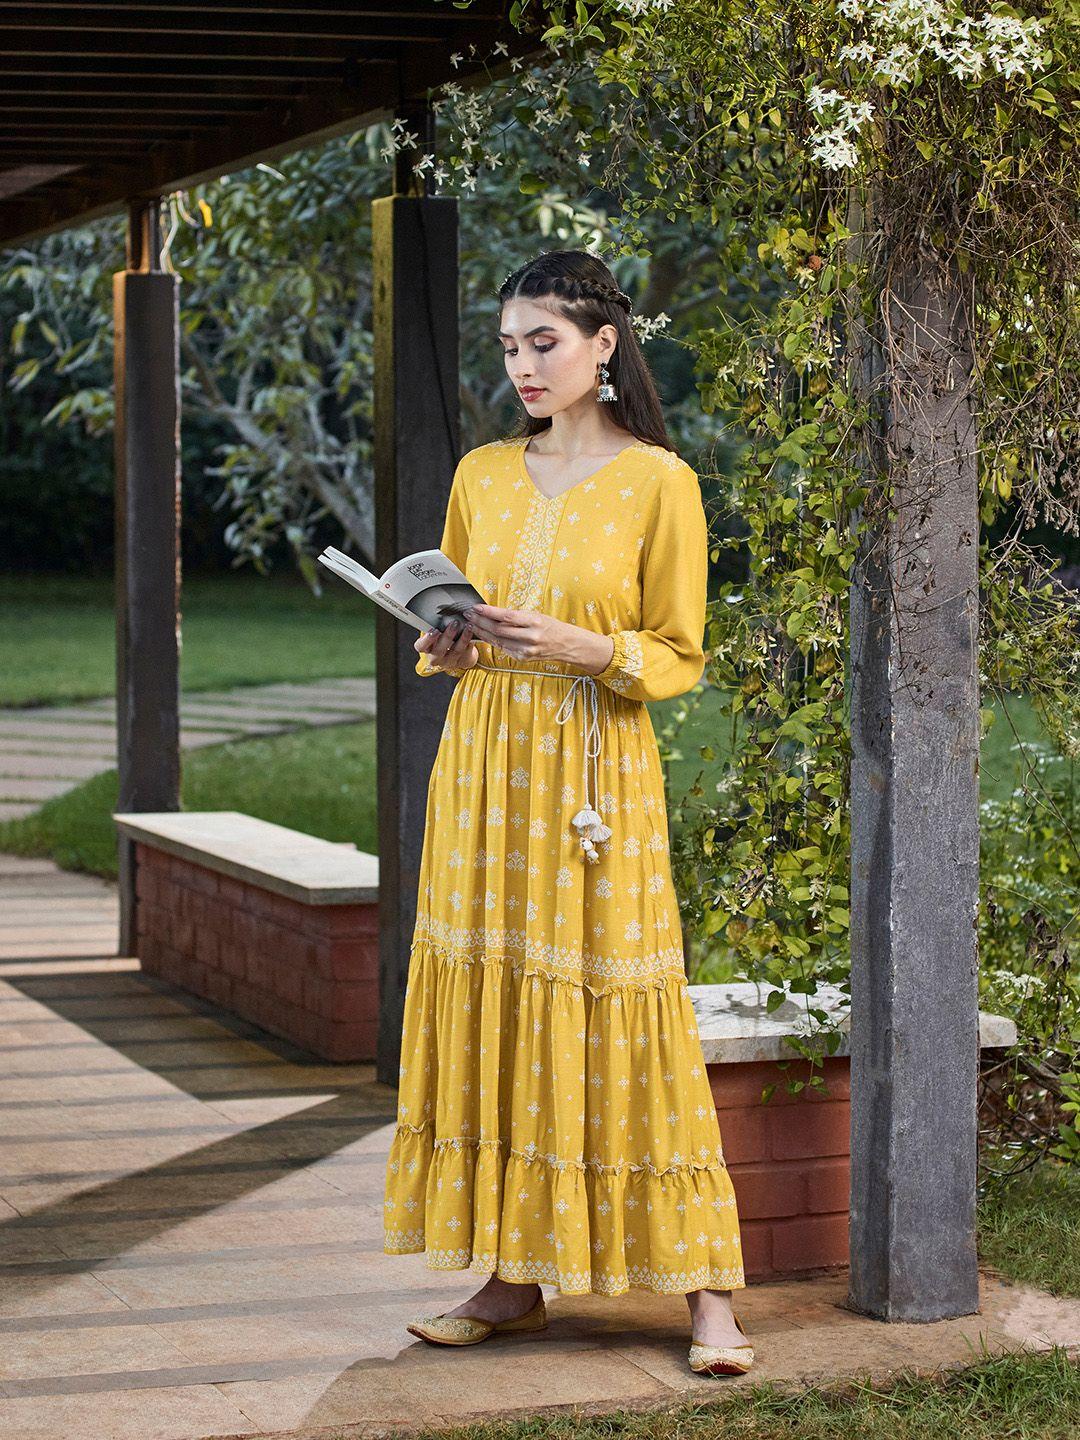 global-desi-women-mustard-yellow-&-off-white-printed-ruffle-detail-fit-and-flare-dress